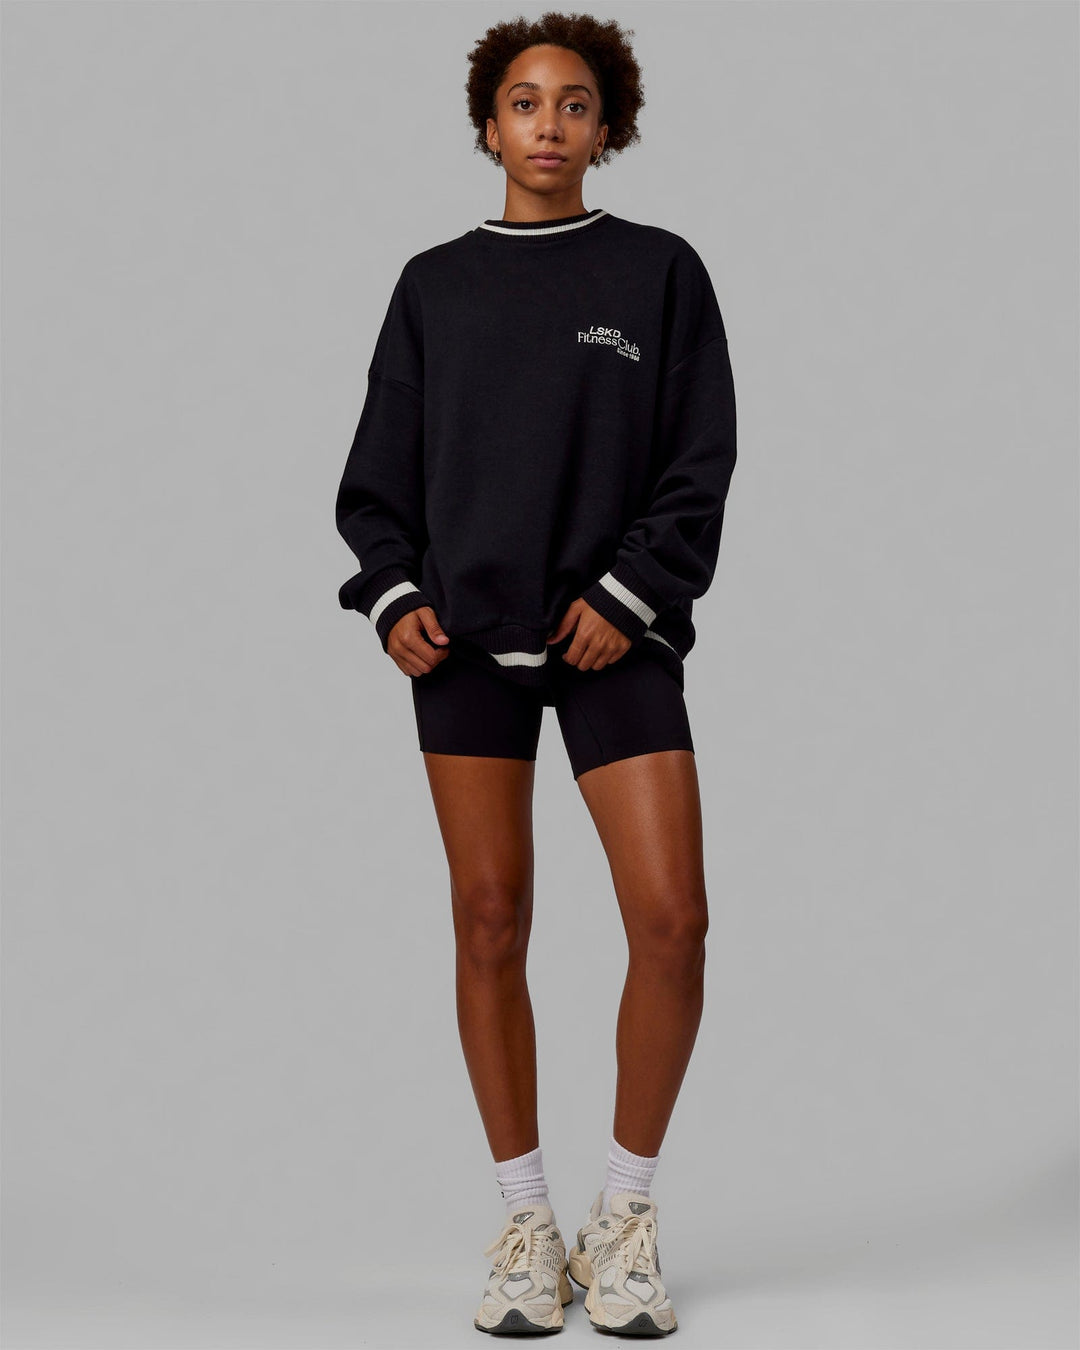 Woman wearing Unisex Fitness Club Sweater Oversize - Black-Off White